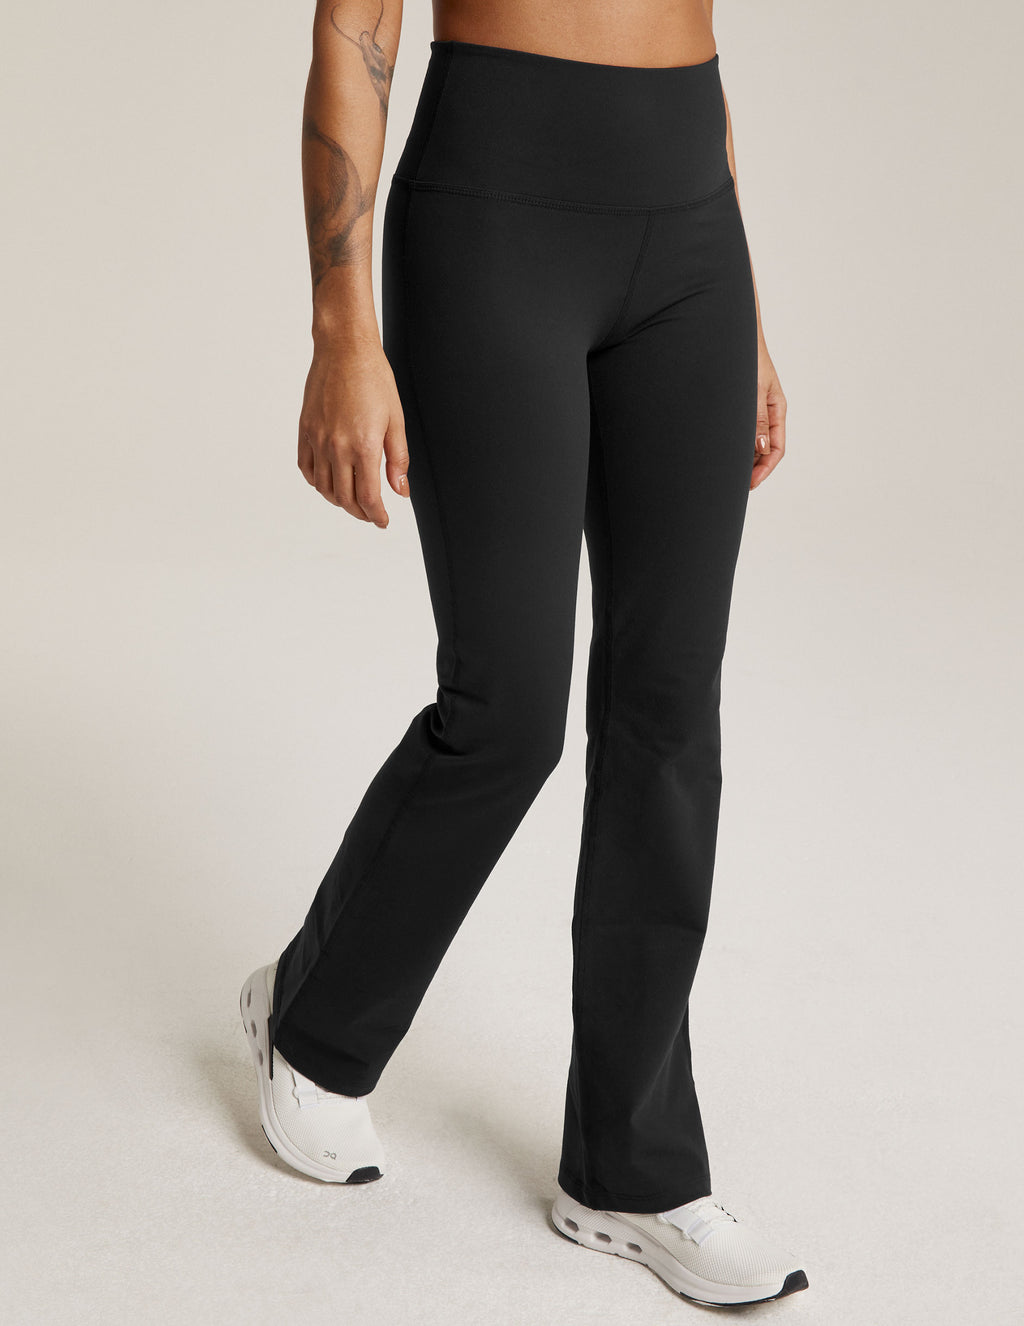 Drakon leggings are made of Supplex fabric that moves & stretches with  you while the thick flat waistb…